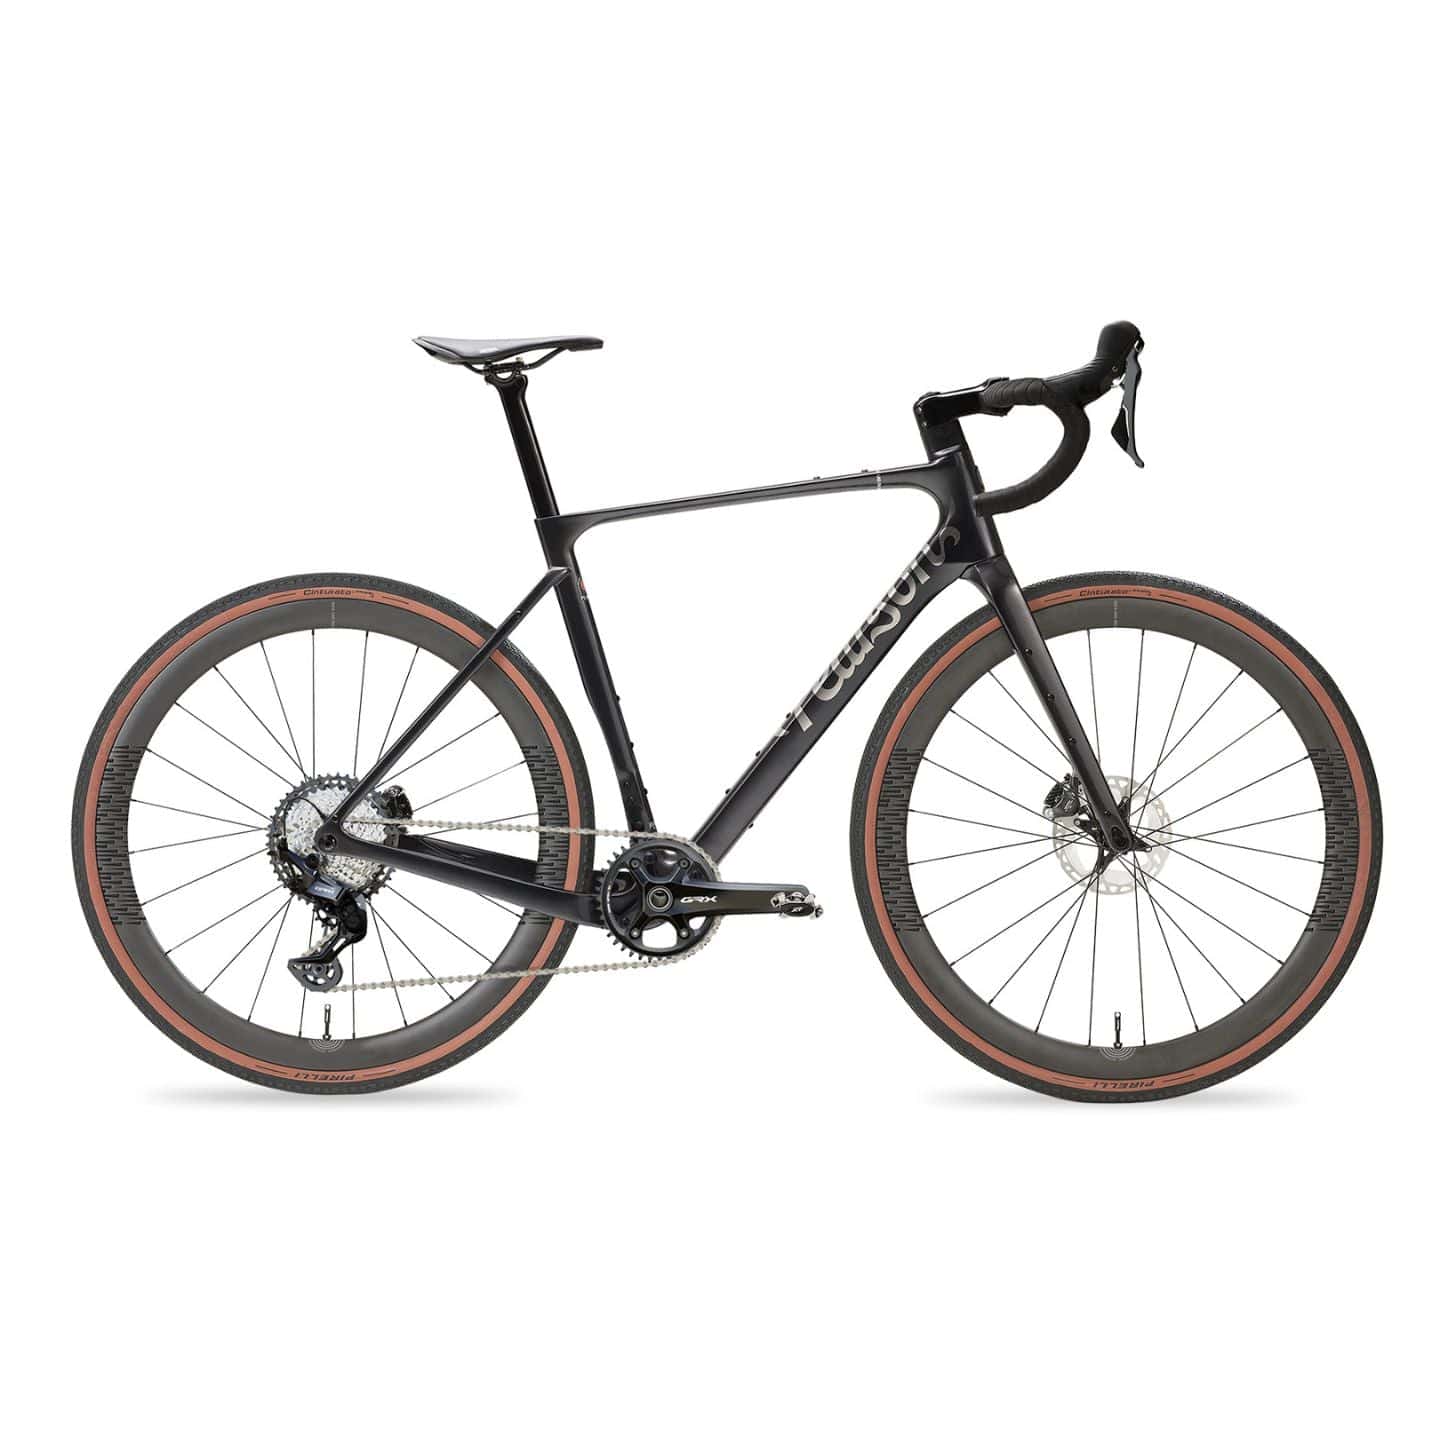 Pearson Cycles PCS, ON AND ON - GRX 820, 1 / Black